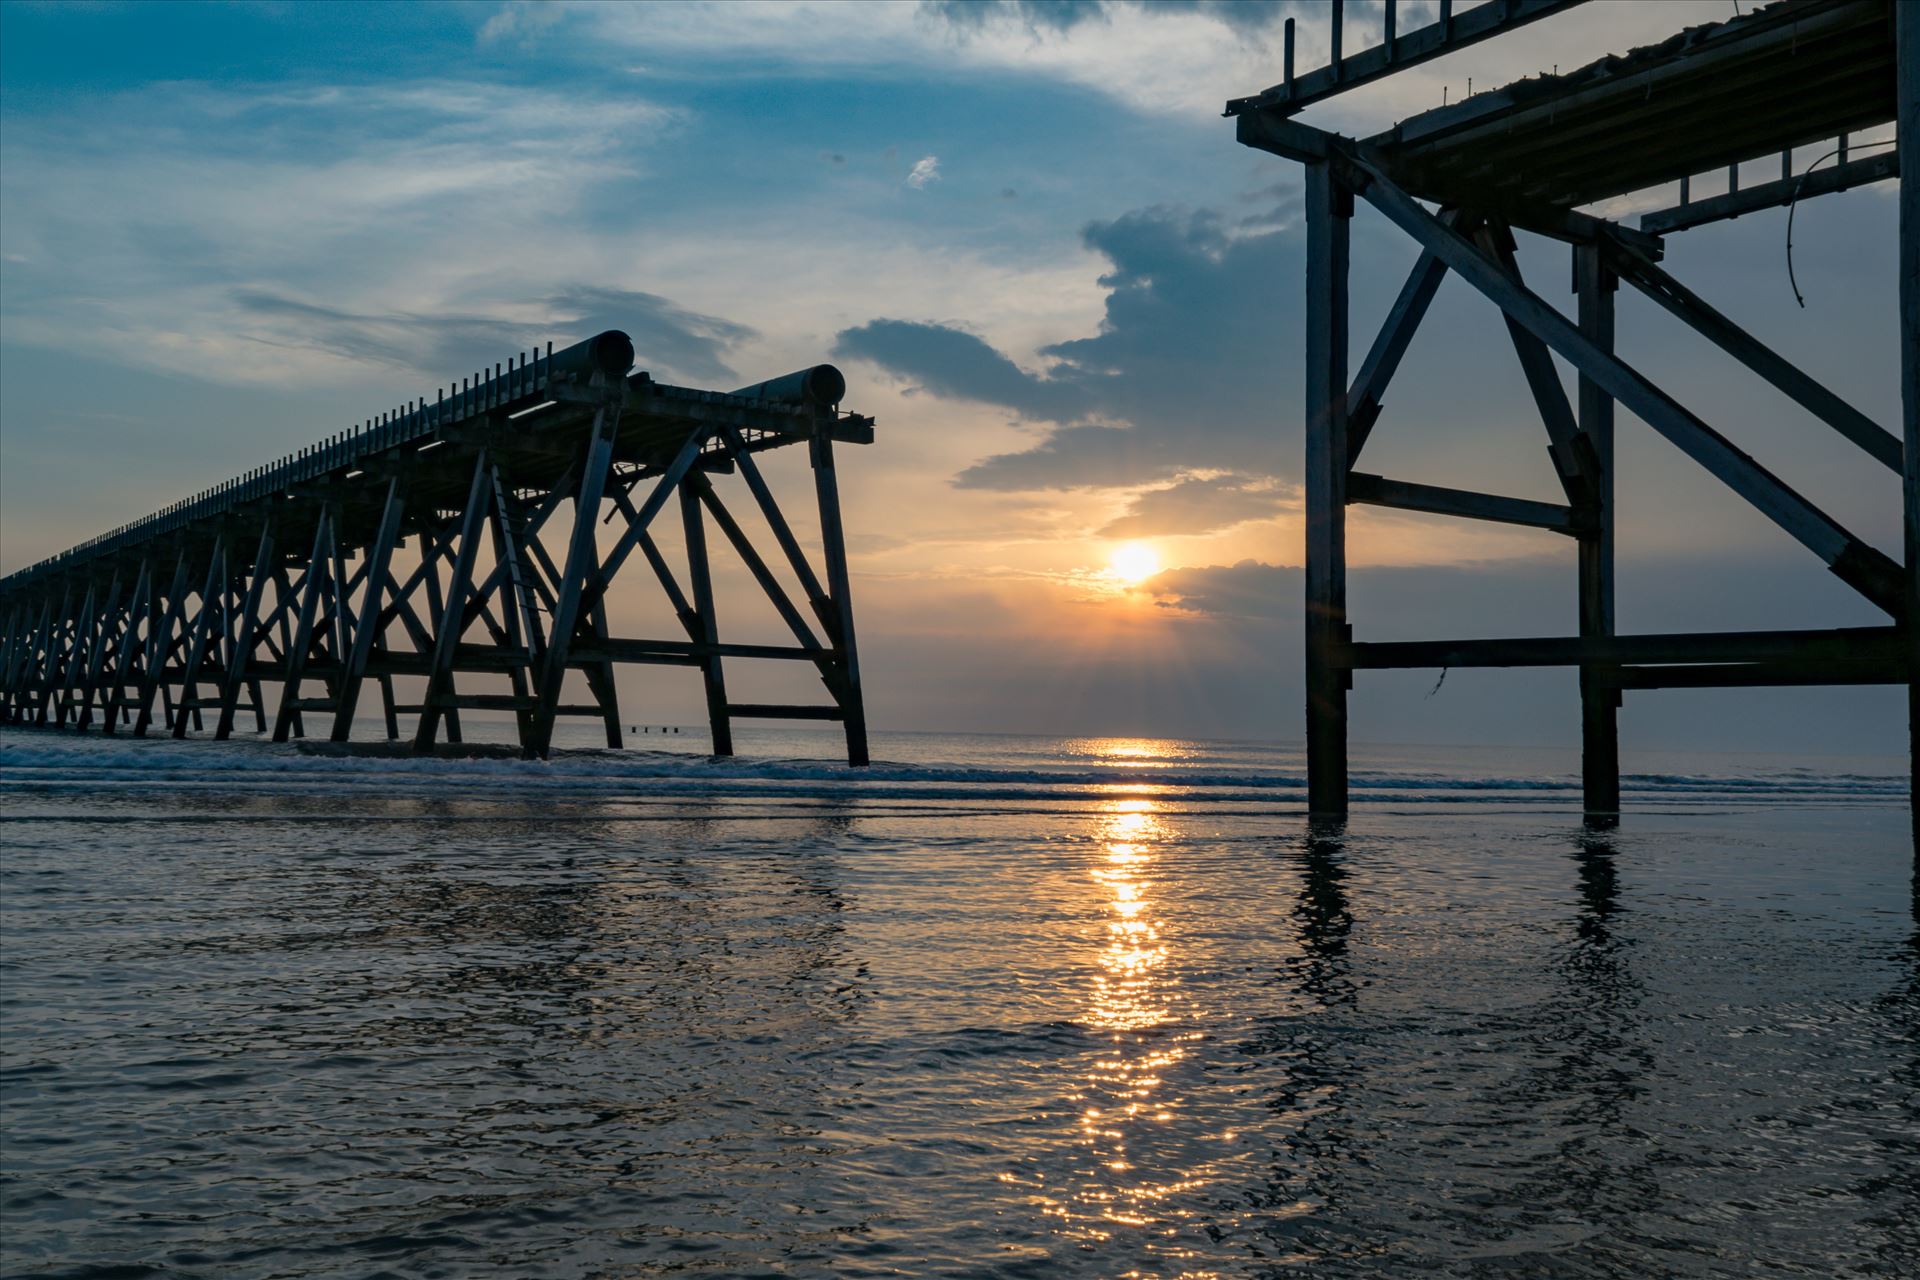 Sunrise Steetley Pier 2 - You have to be up early for a shot like this by AJ Stoves Photography